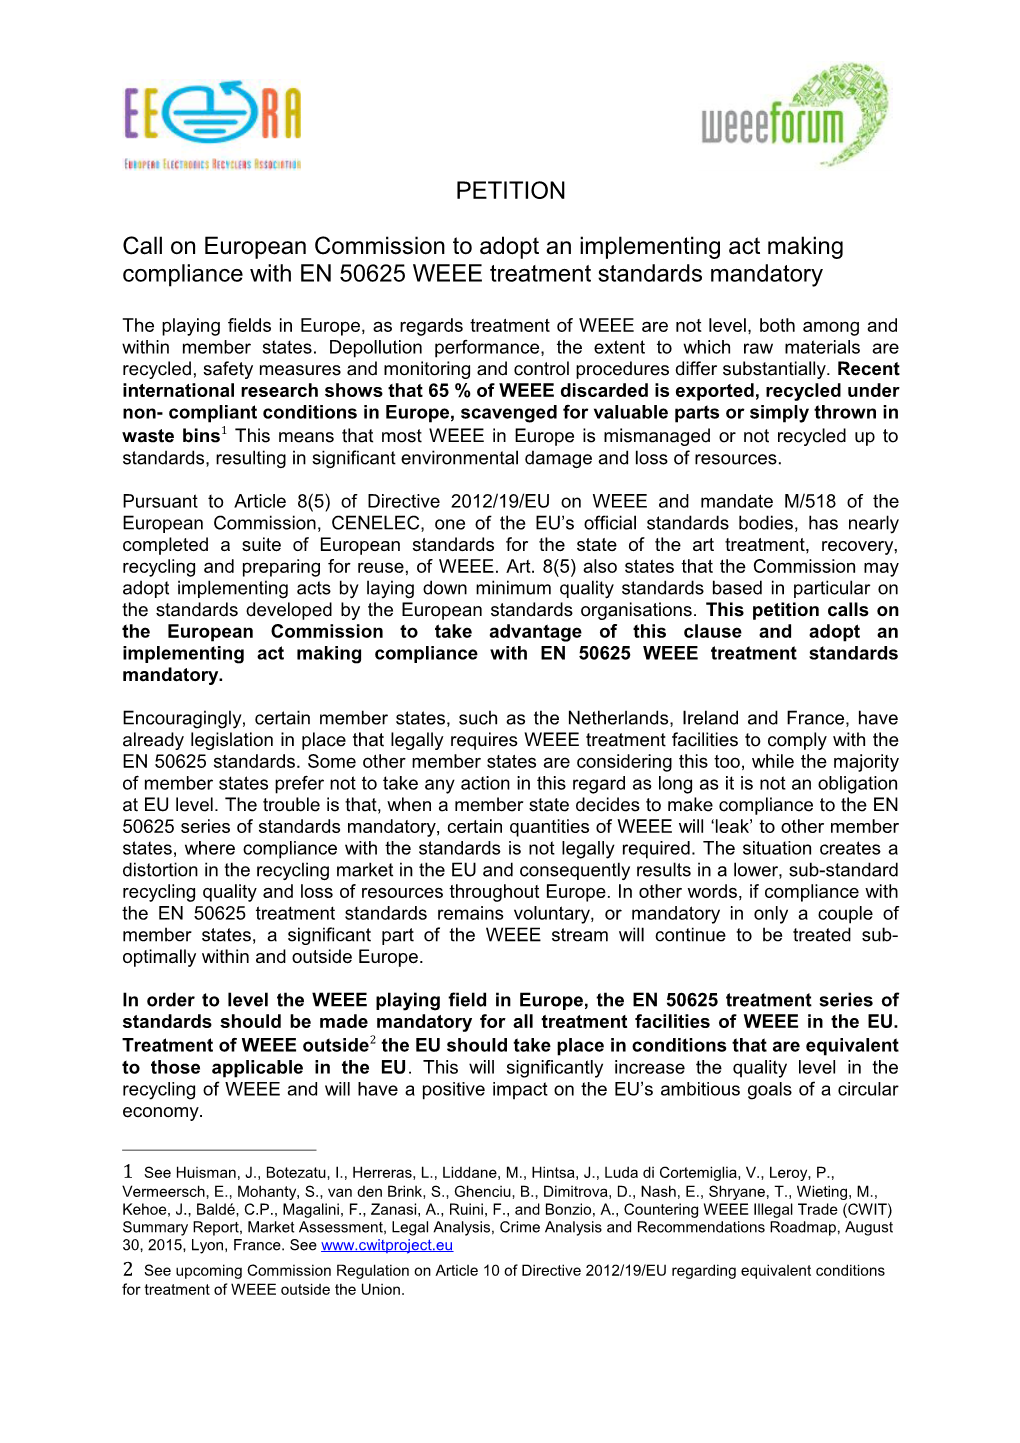 Call on European Commission to Adopt an Implementing Act Making Compliance with EN 50625